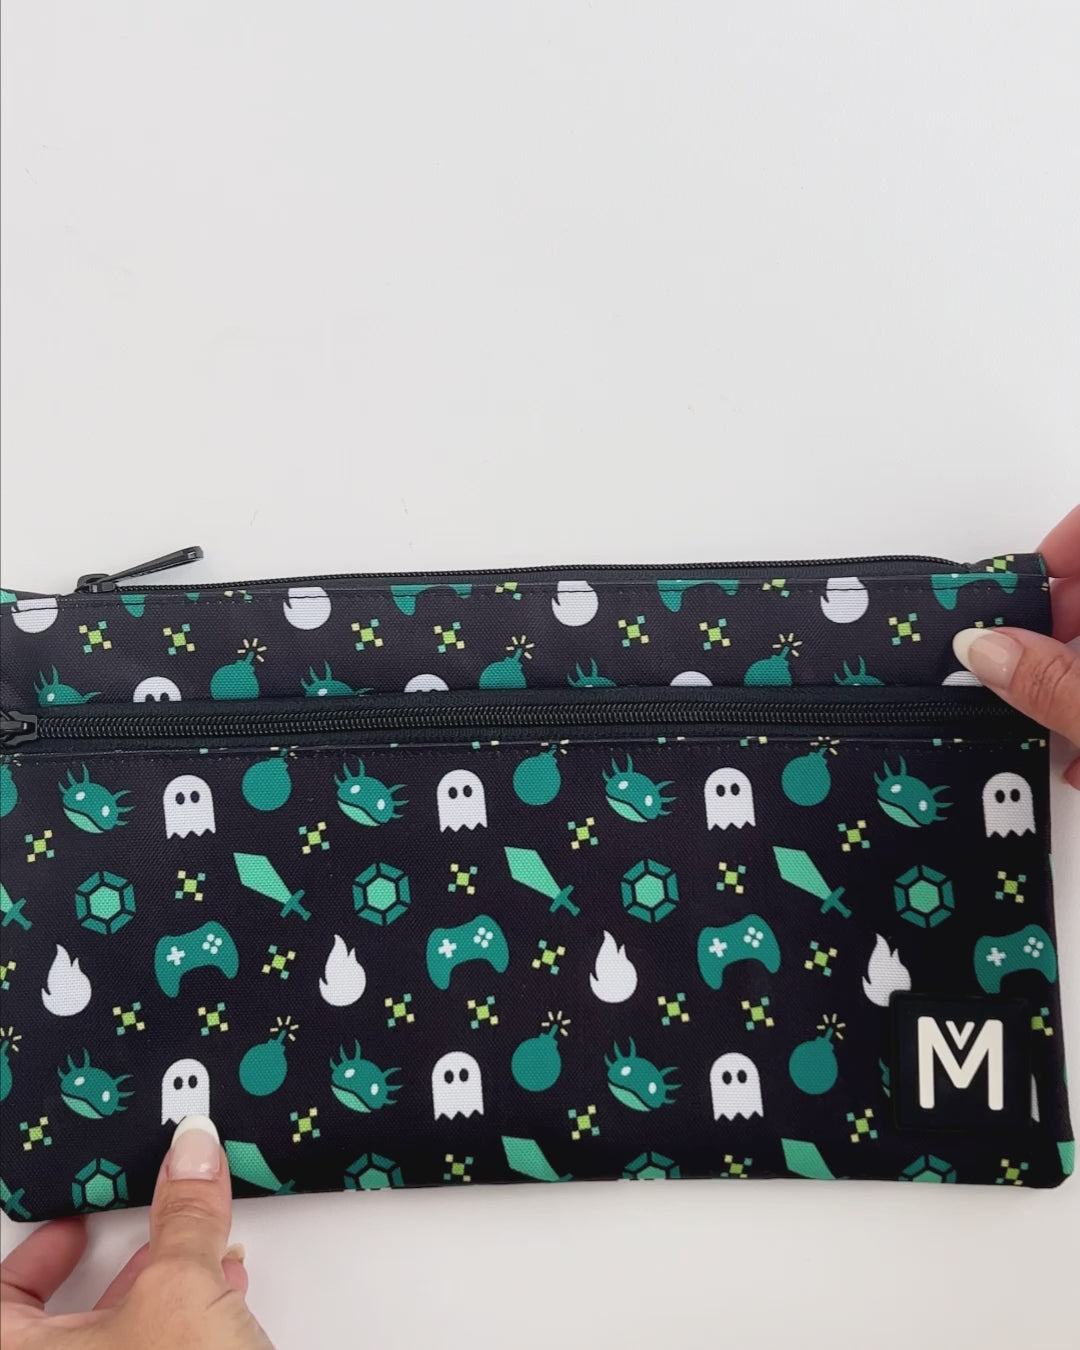 MontiiCo Pencil Case - Game On